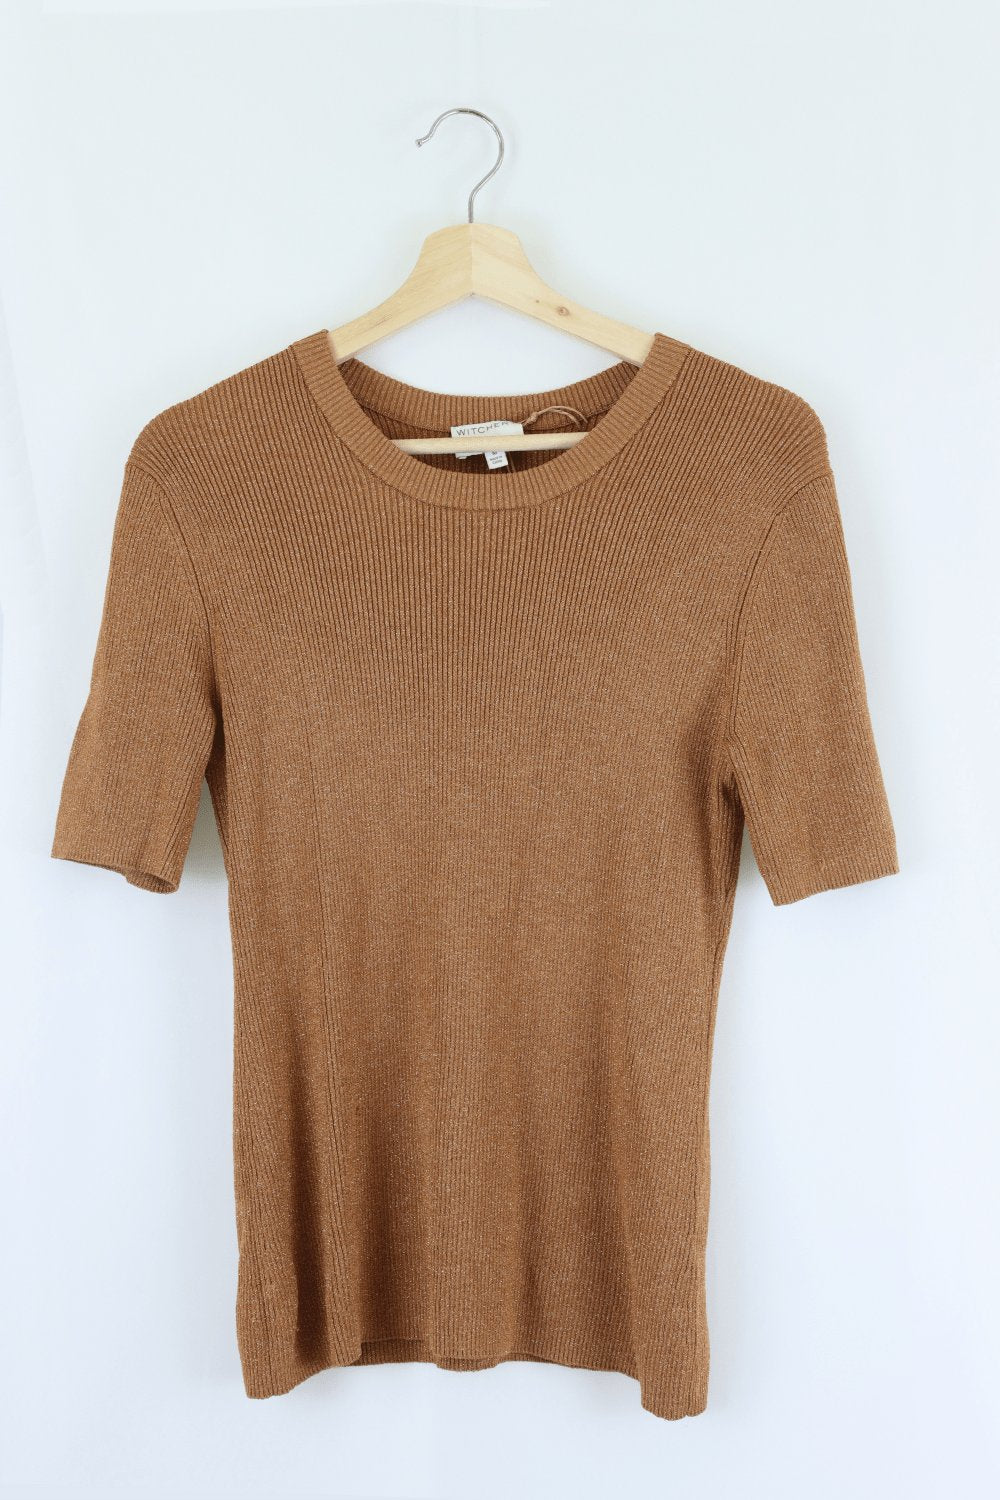 Witchery Brown Sparkle Top M